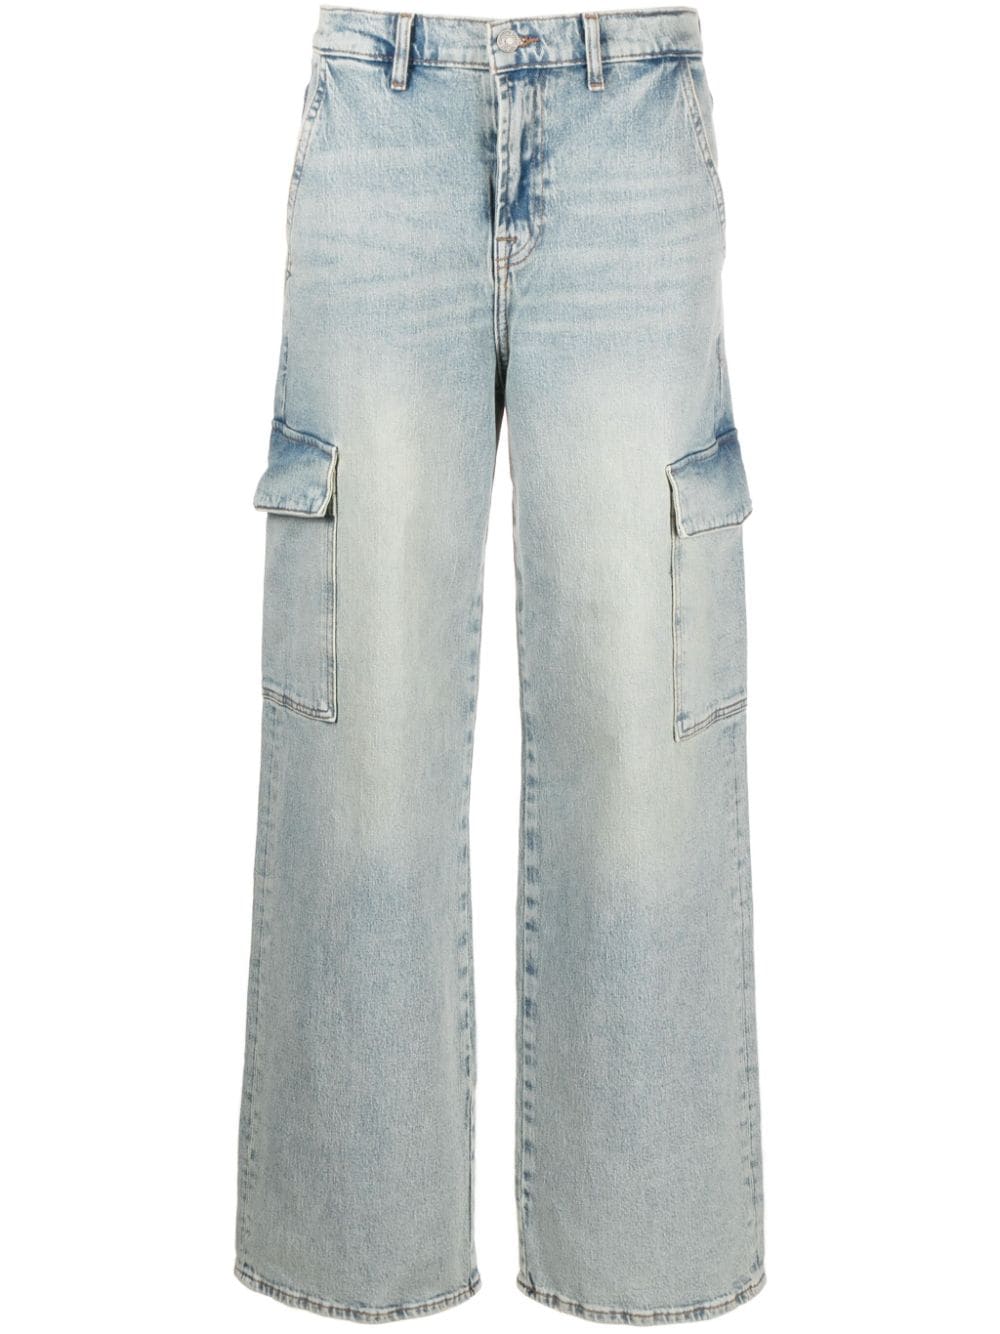 7 For All Mankind Cargo Scout wide-leg jeans - Blue von 7 For All Mankind